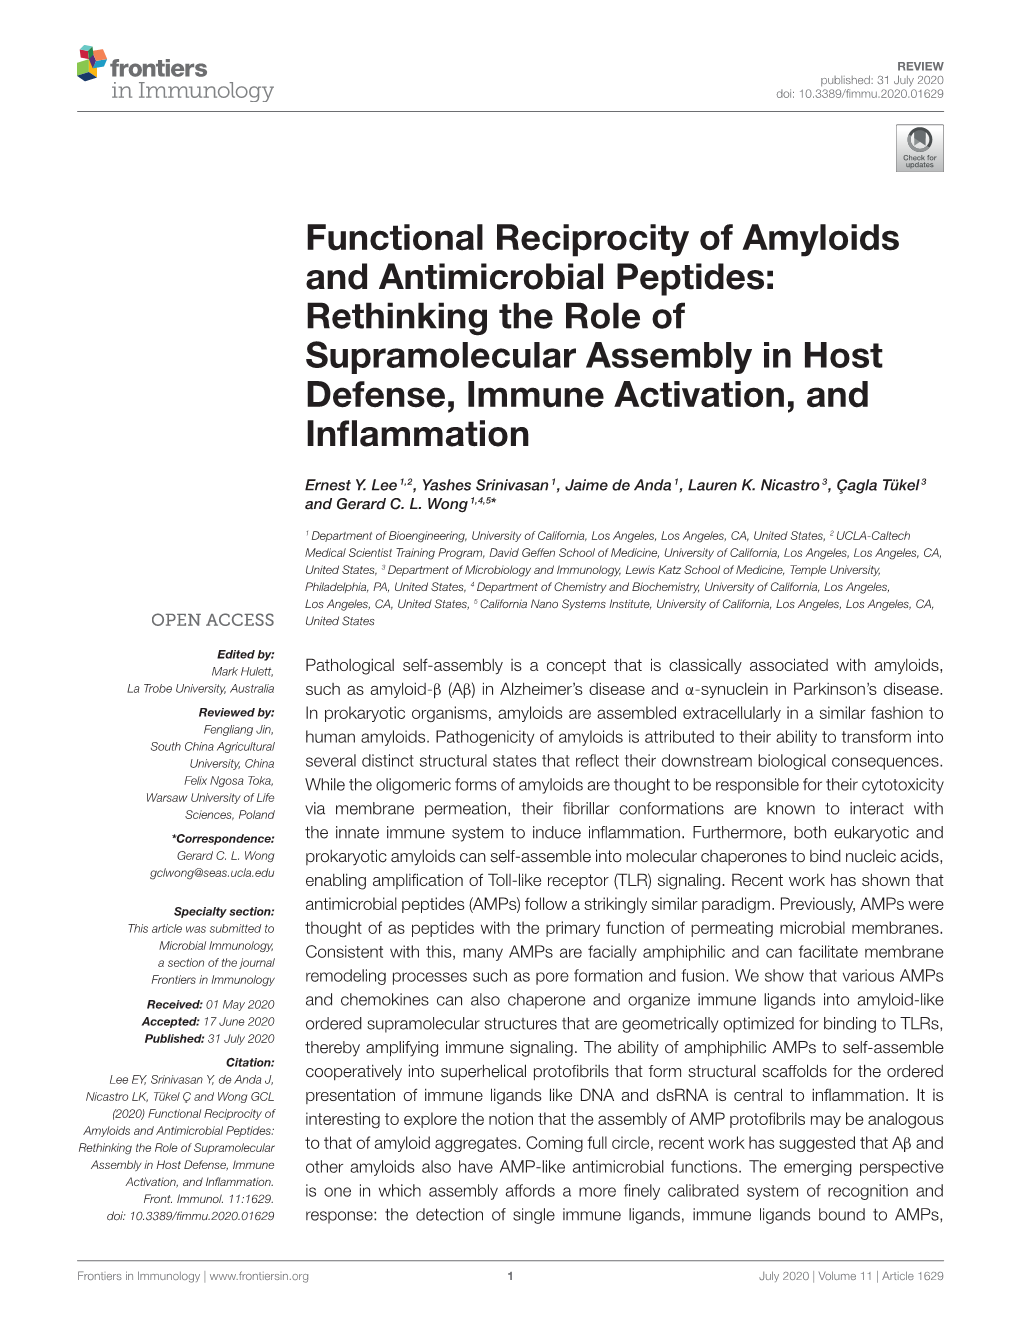 Functional Reciprocity of Amyloids and Antimicrobial Peptides: Rethinking the Role of Supramolecular Assembly in Host Defense, Immune Activation, and Inﬂammation